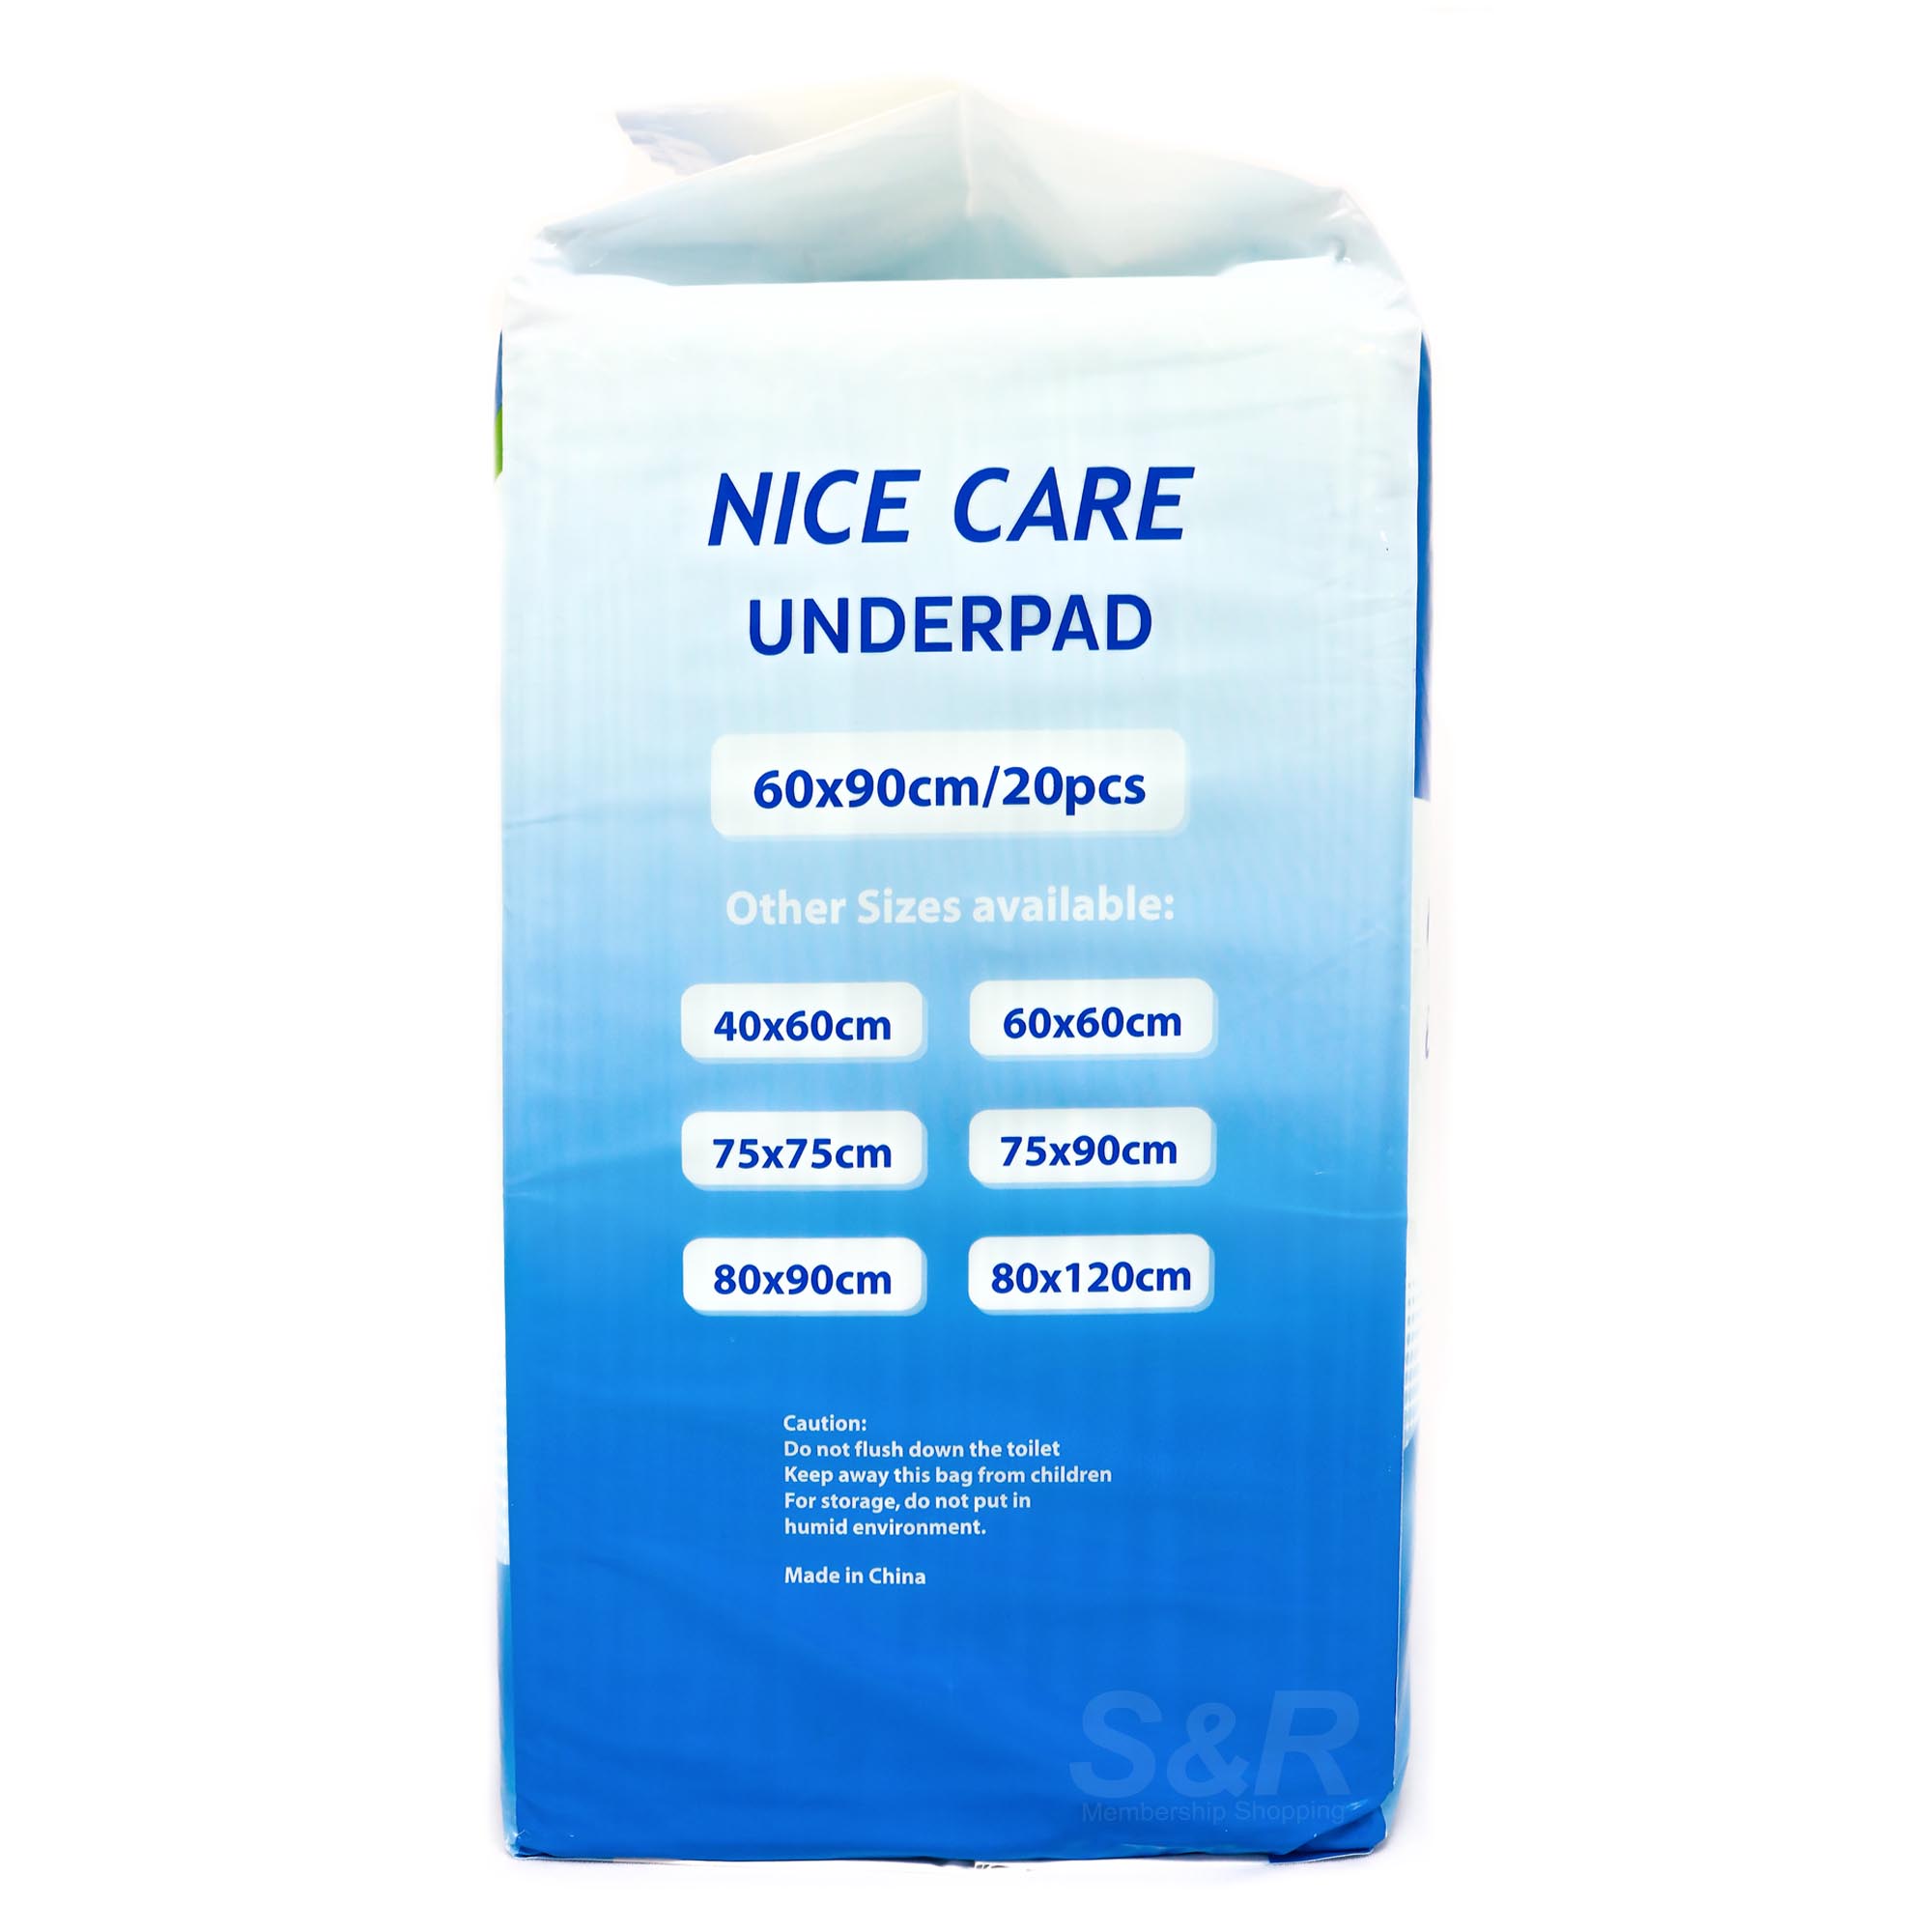 UnderPads